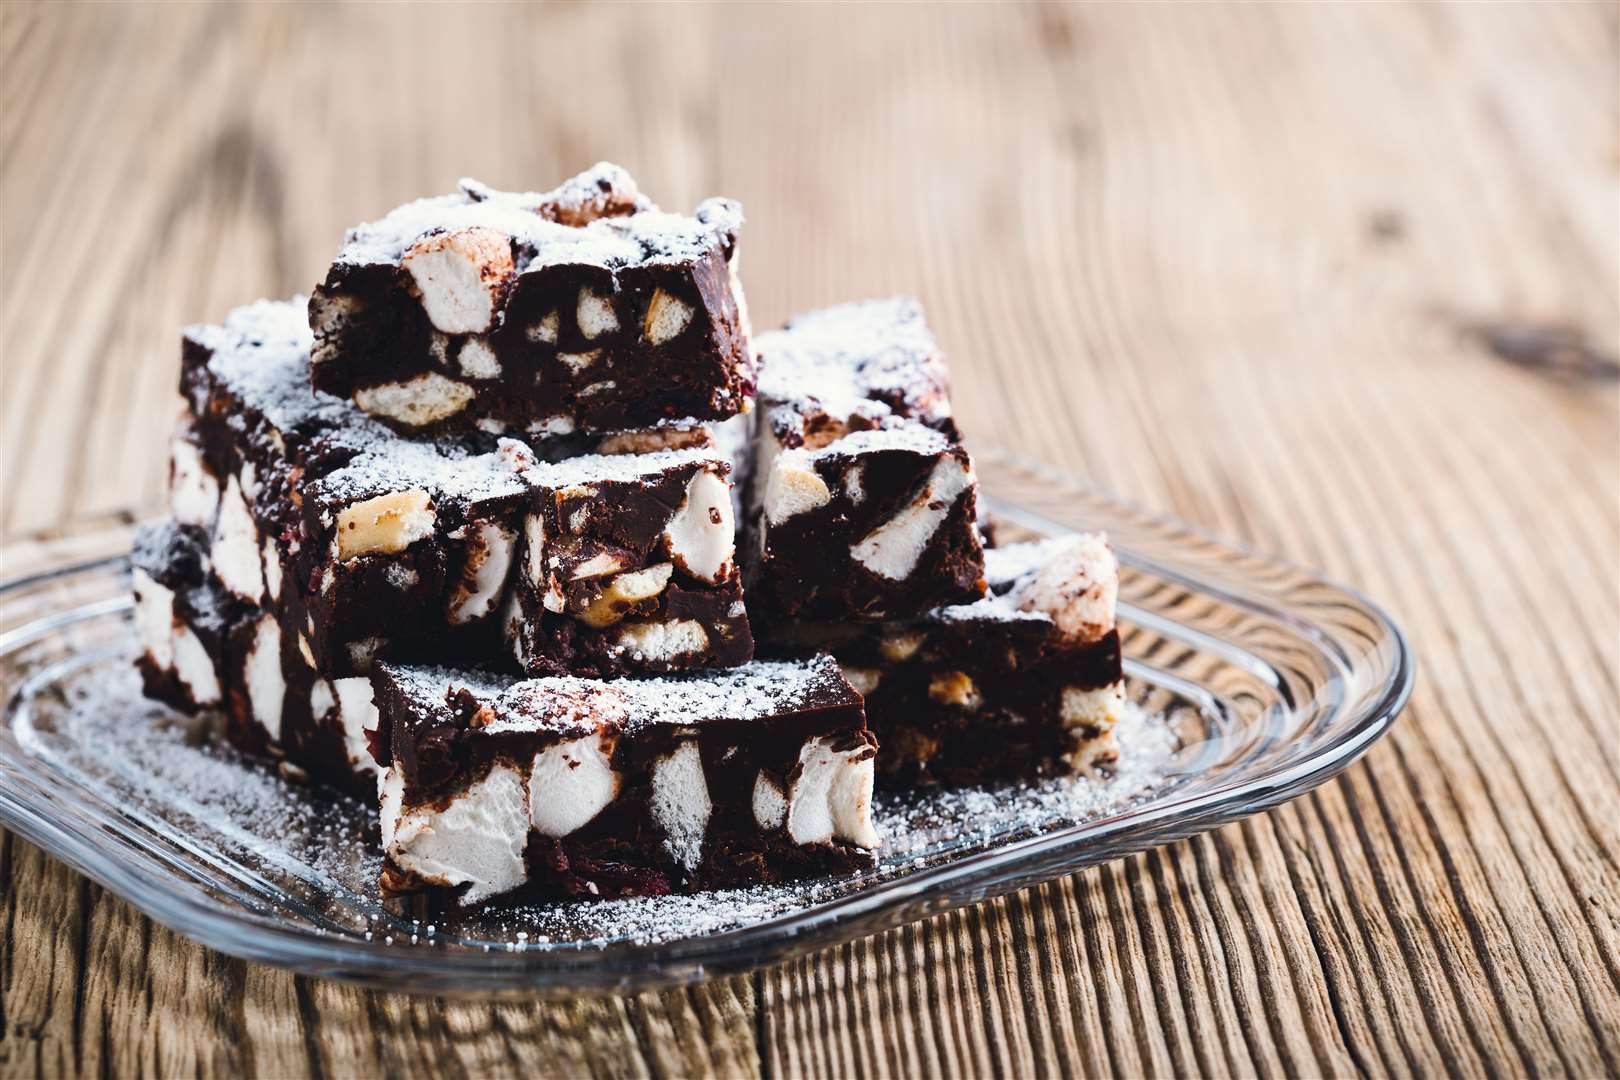 Add your favourite bites to rocky road.